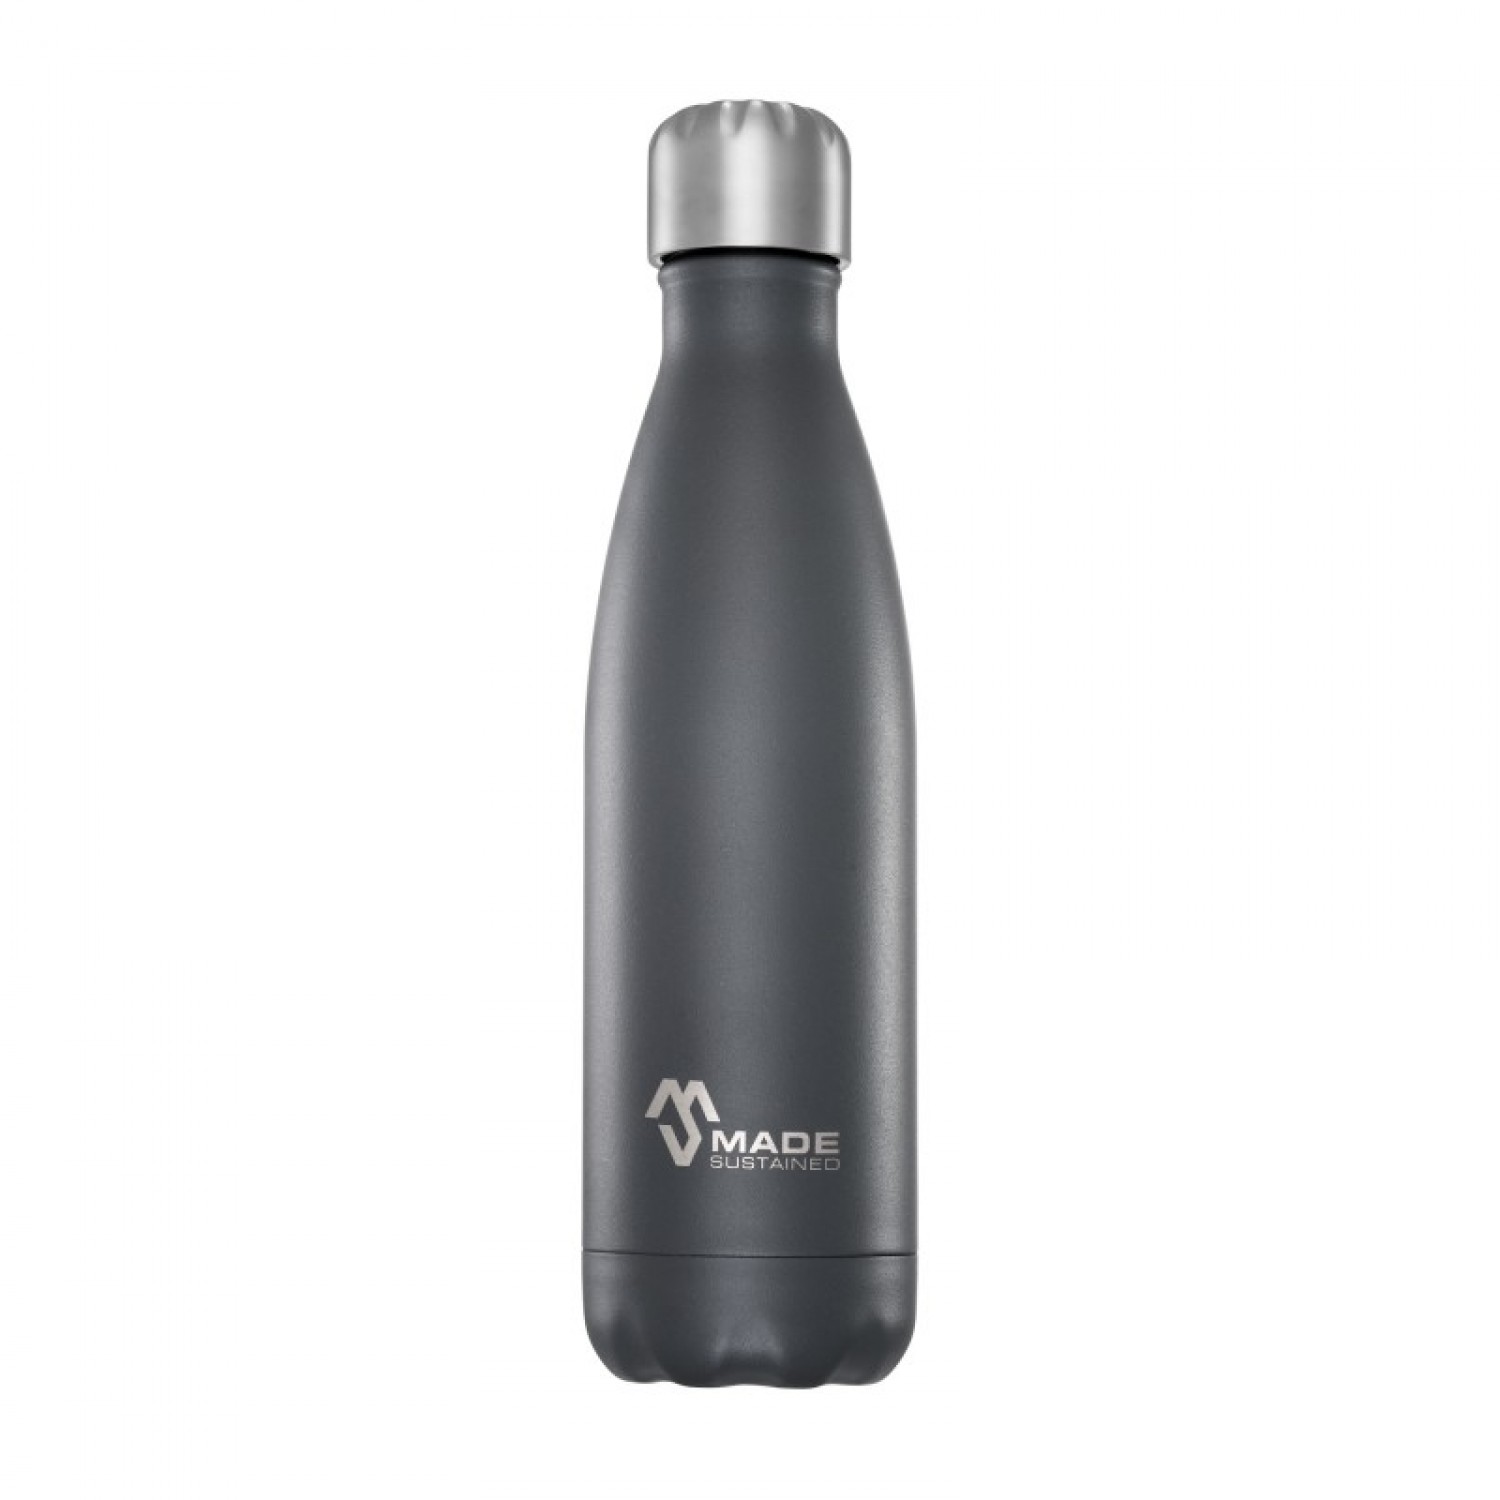 Plastic-free Knight Stainless Steel insulated Bottle | Made Sustained